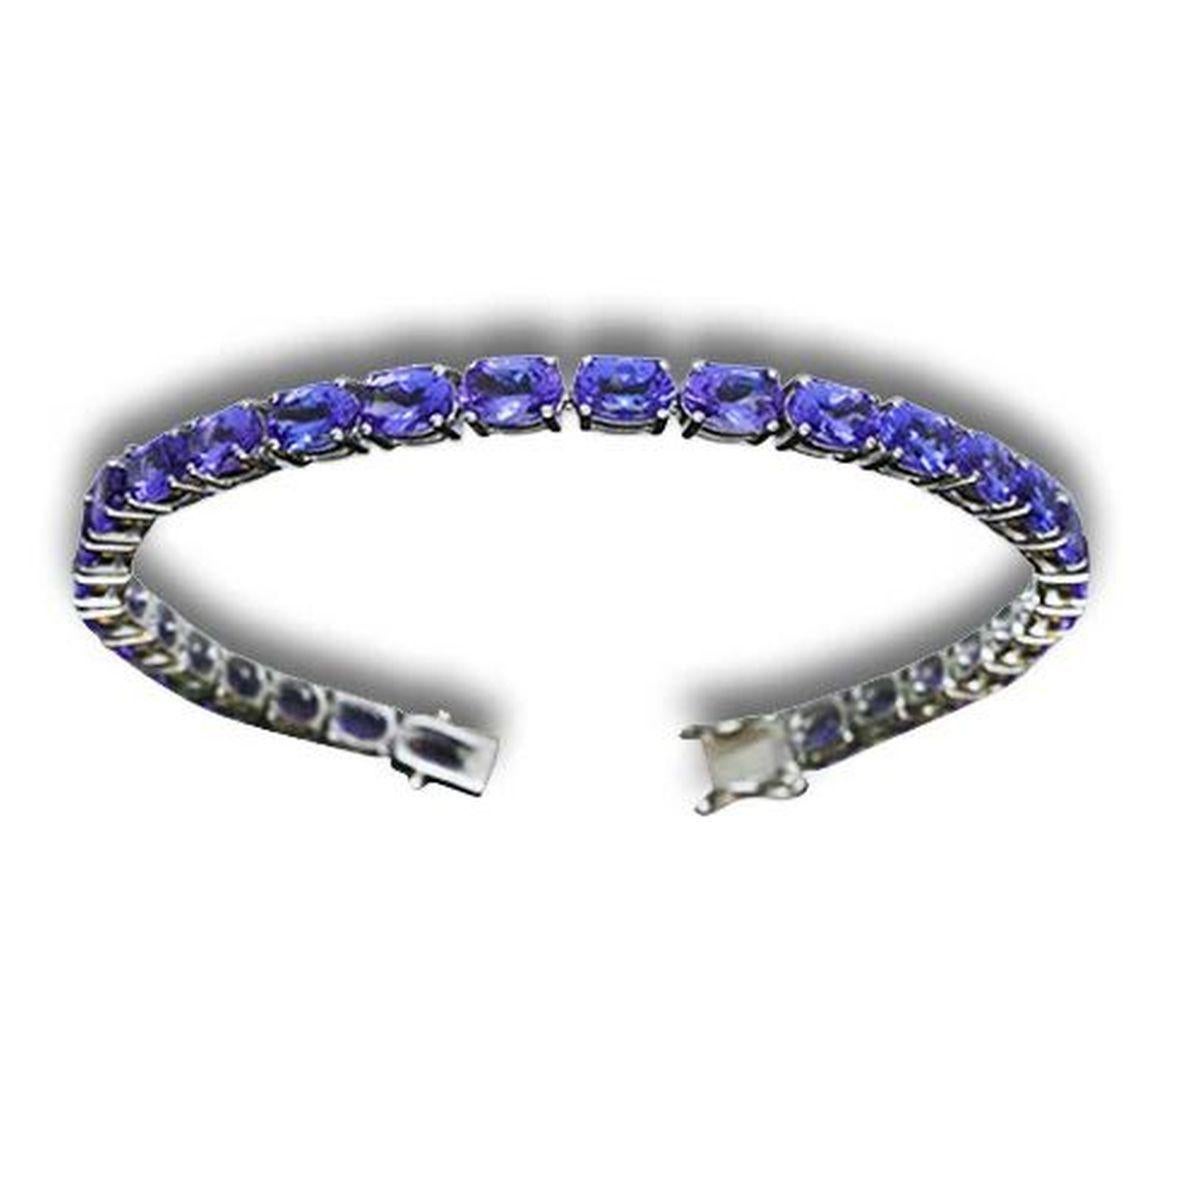 Vintage Red Carpet Tanzanite Gemstone Gold Bracelet In Excellent Condition For Sale In Montreal, QC